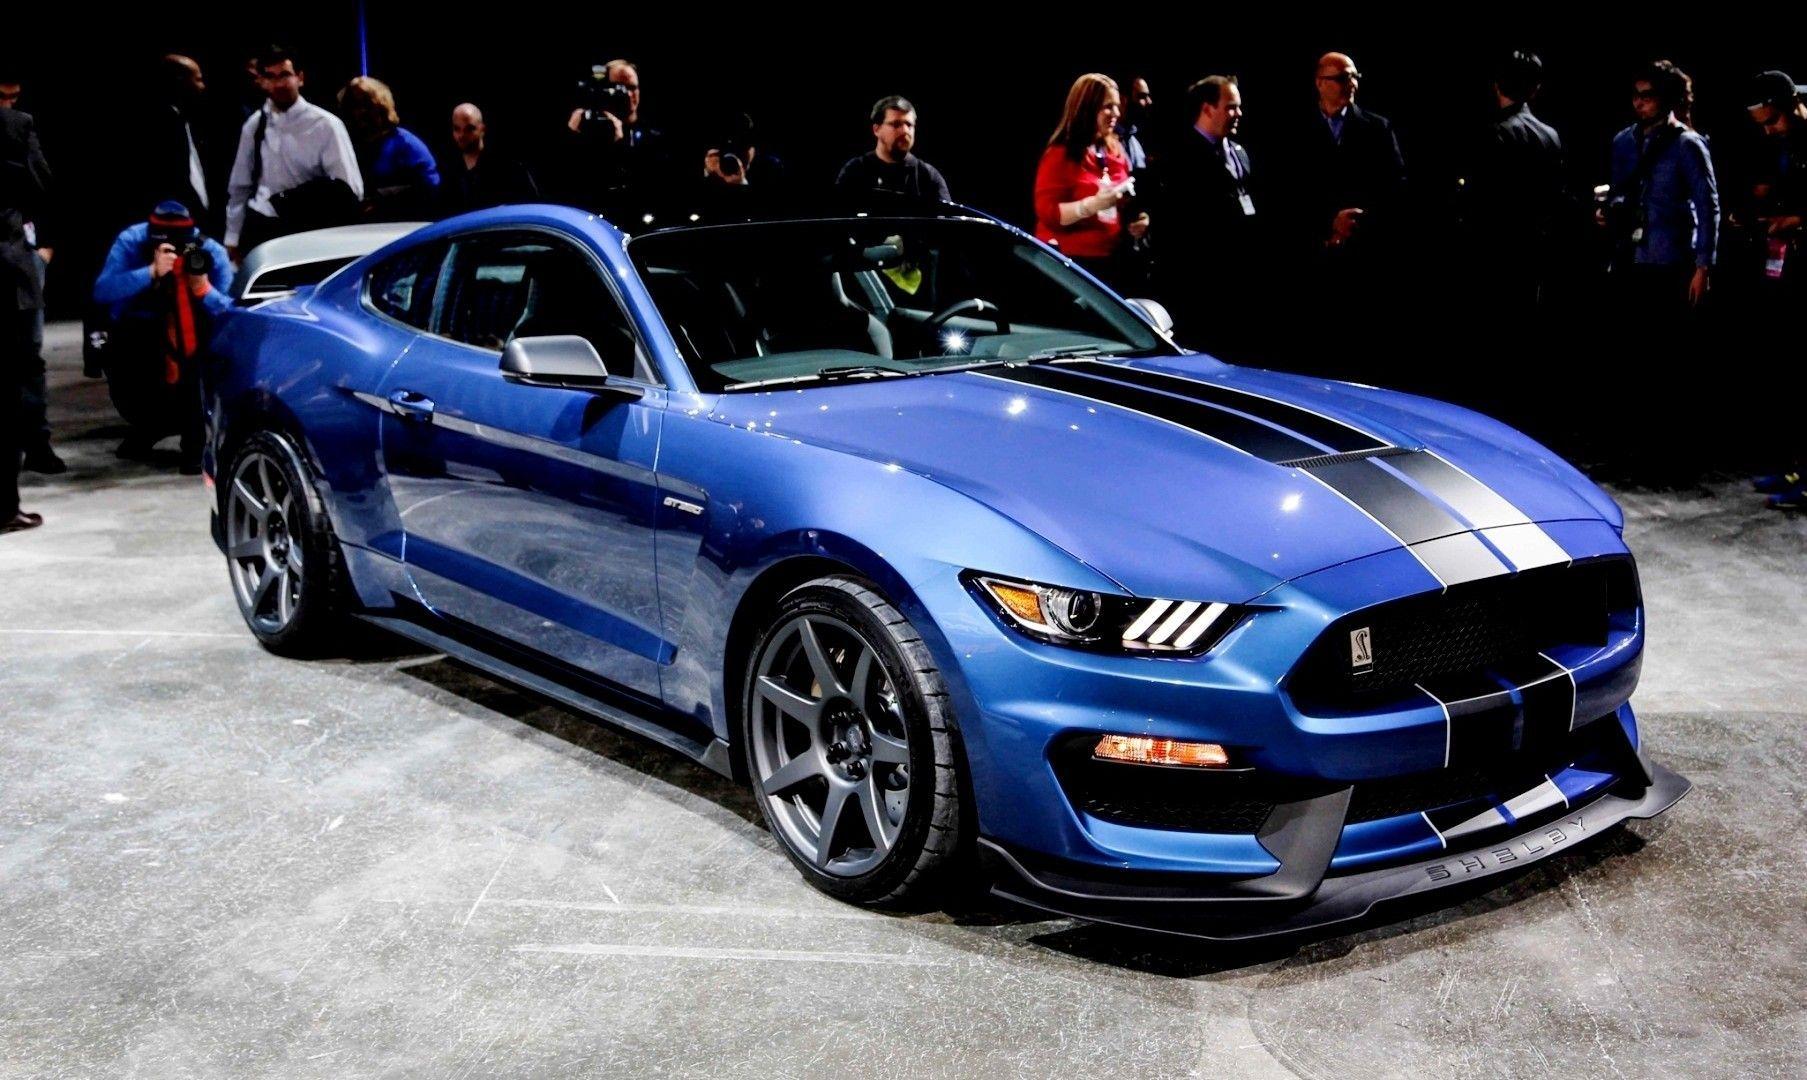 Ford Mustang Shelby GT ford mustang wallpaper 1080p